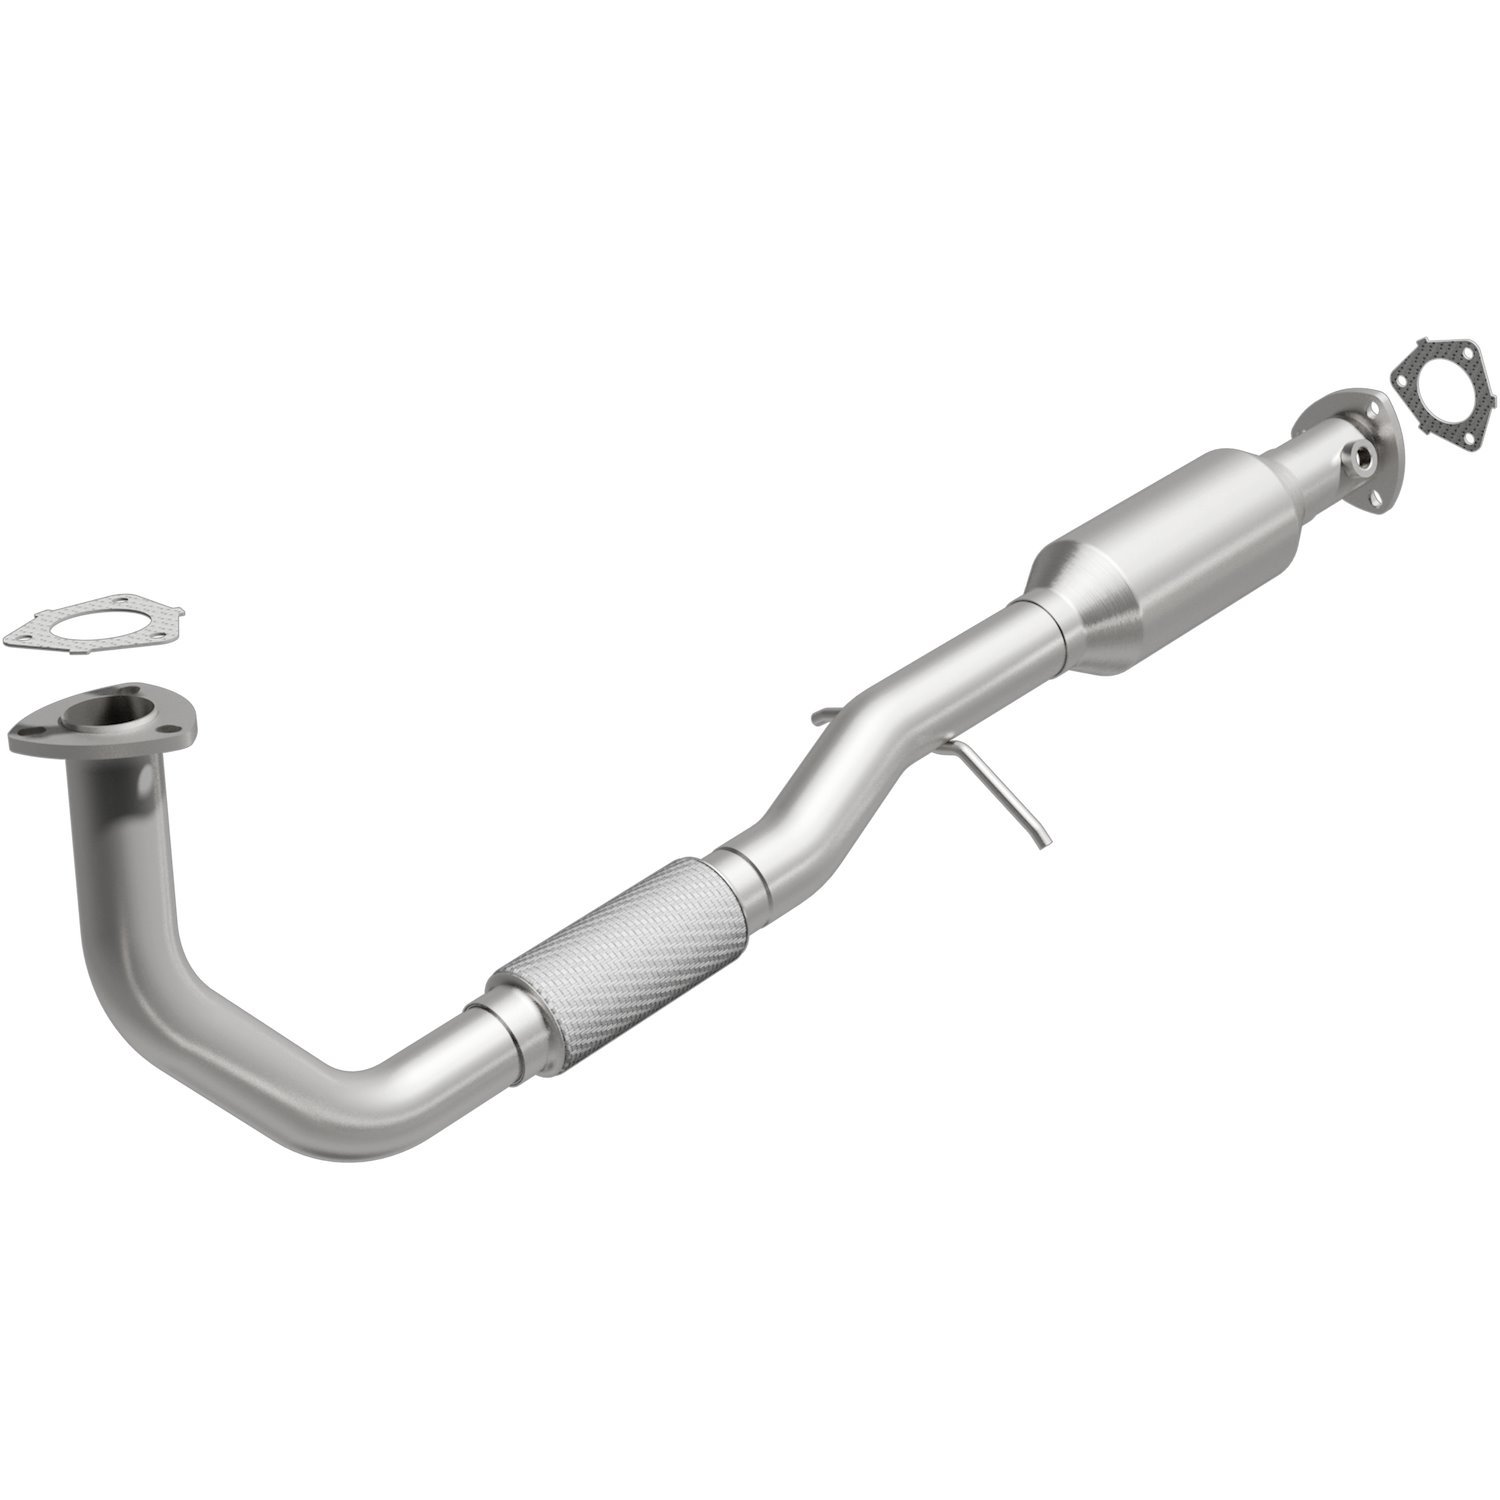 California Grade CARB Compliant Direct-Fit Catalytic Converter 4481222